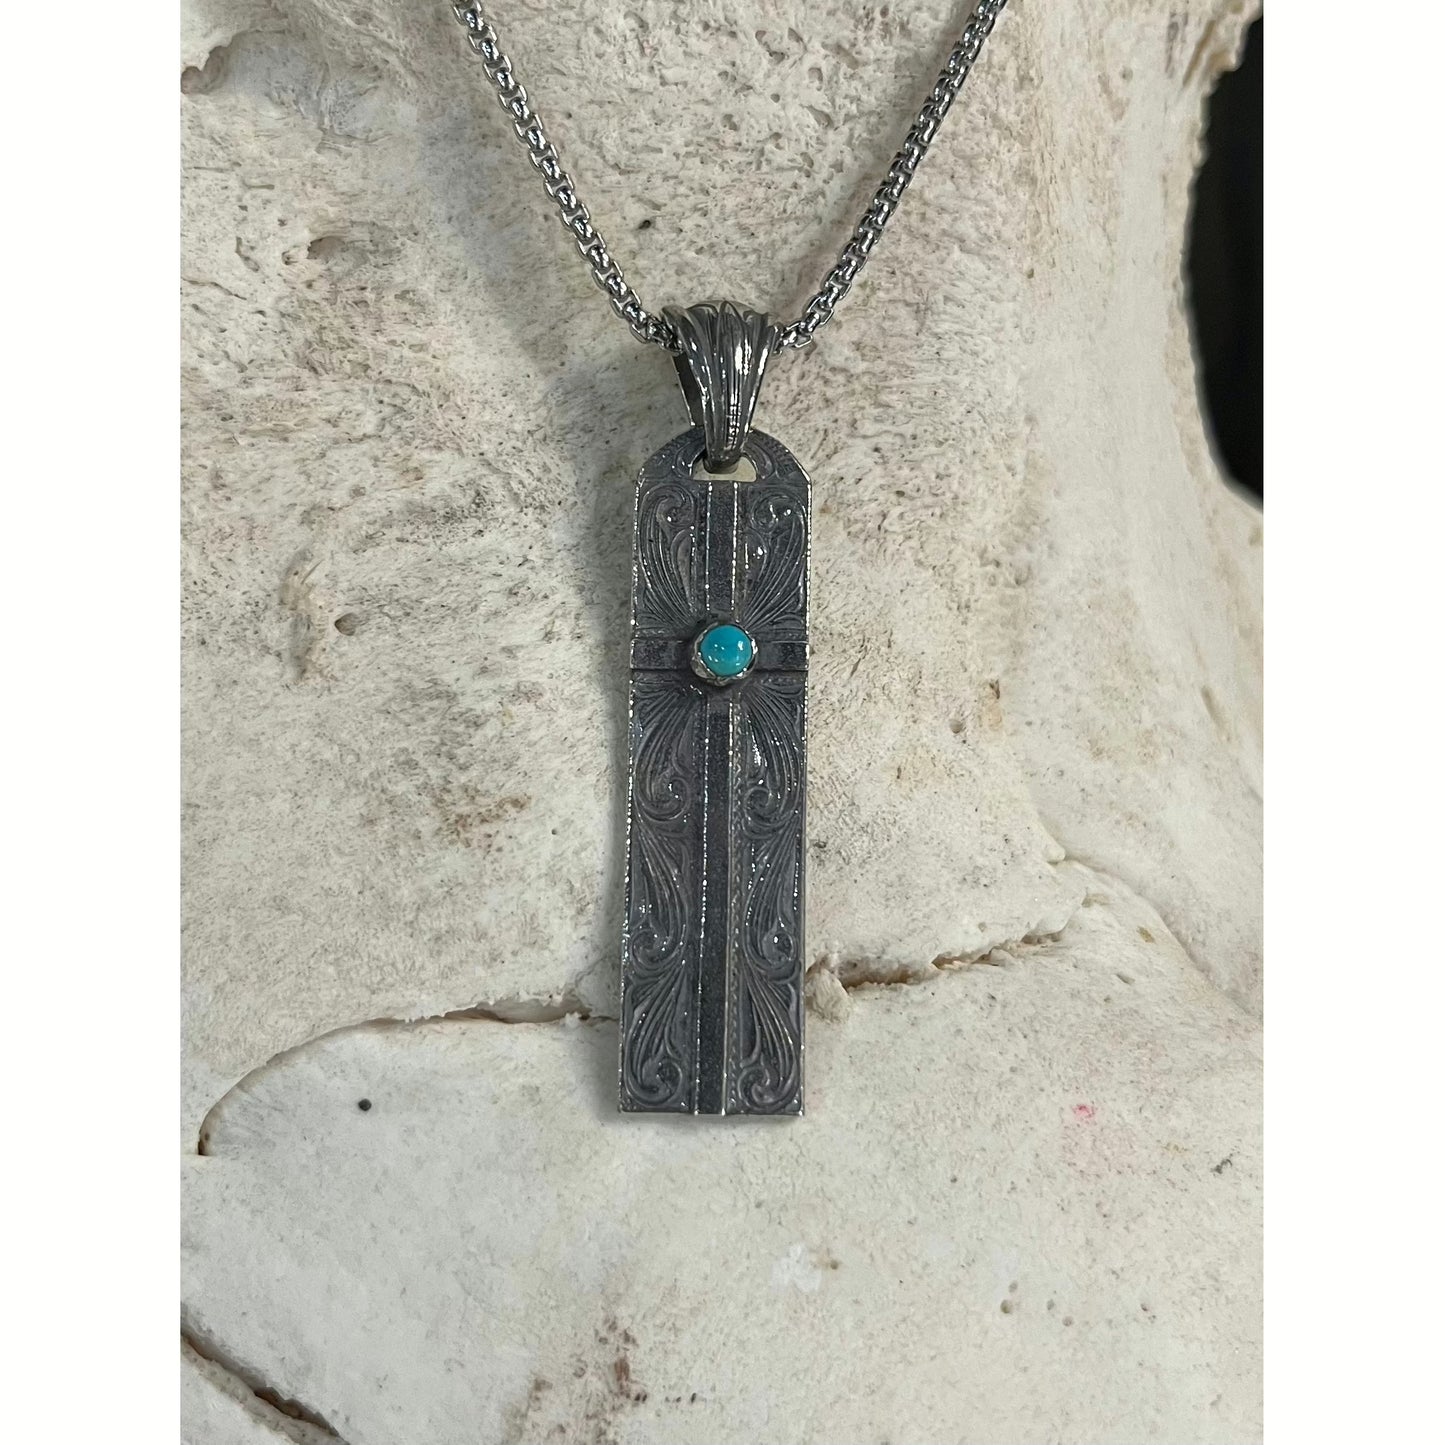 The "Grace" Pendant is a handmade sterling silver pendant with a western style hand engraved scrolling with an overlaid cross that features a bezel set round Kingman turquoise stone from the Kingman Mines in Kingman, AZ. It measures 2 7/8" long and 1/2" wide.